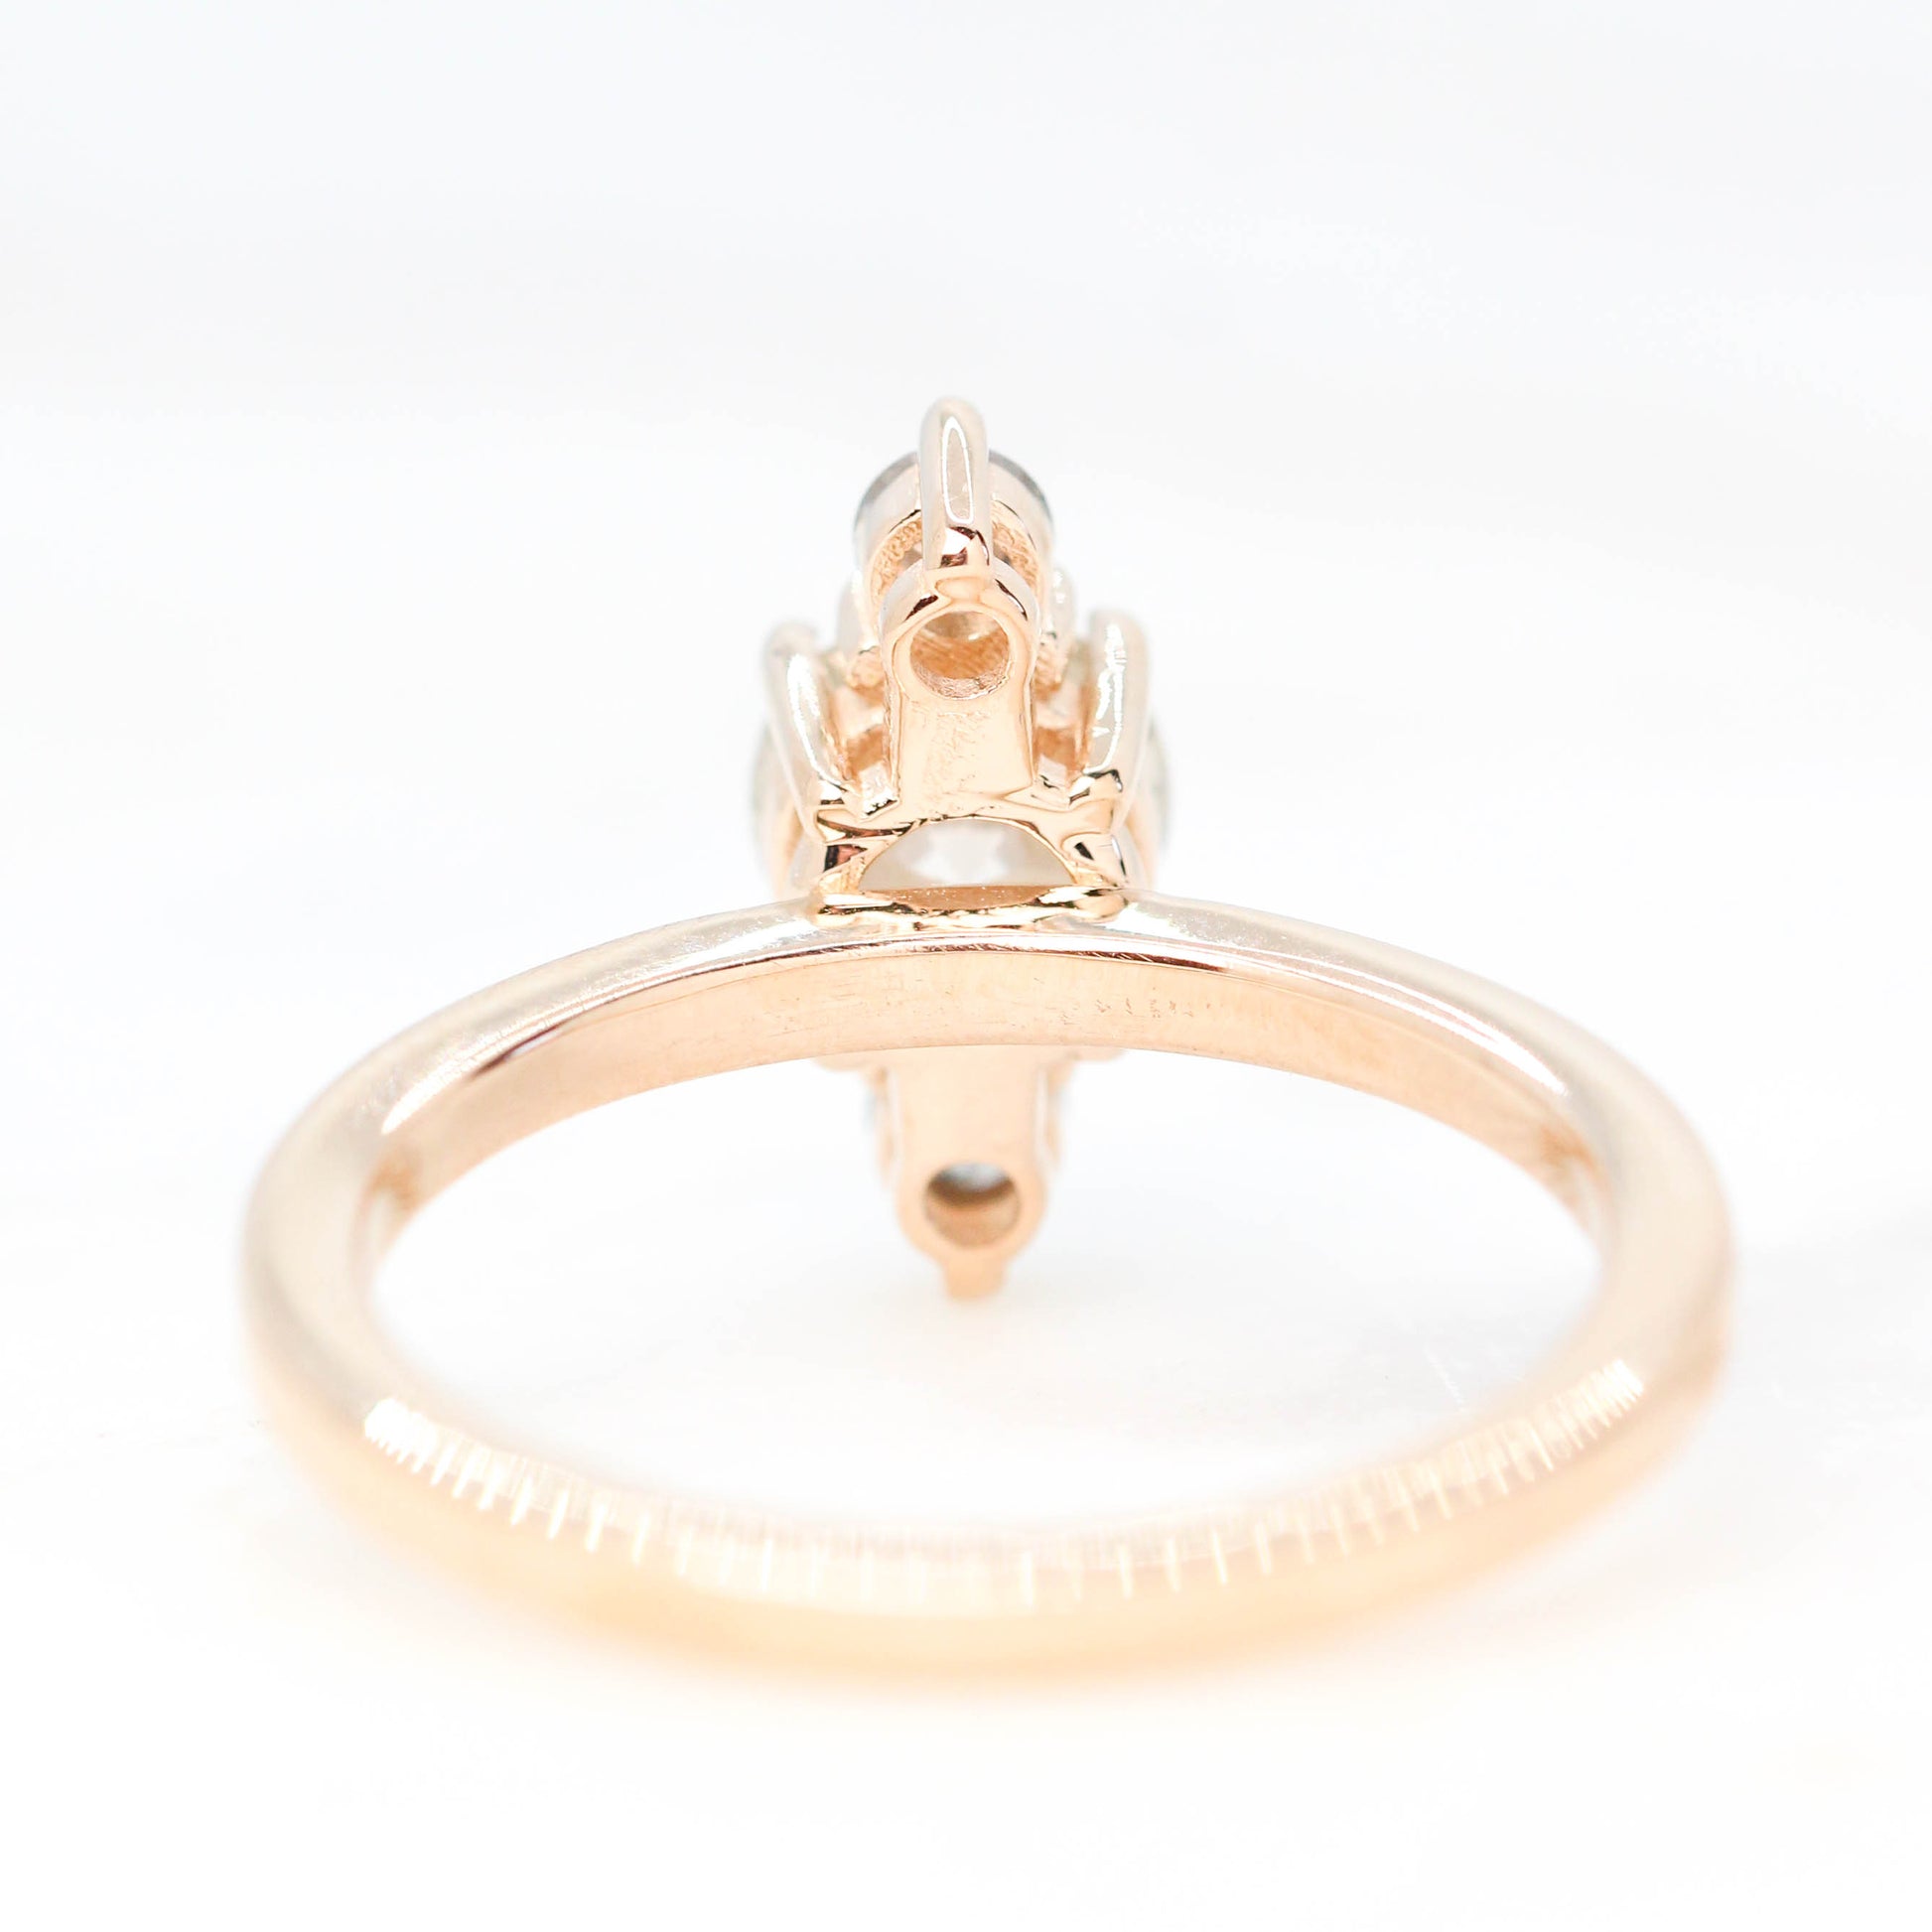 Everest Ring with a 1.07 Carat White Salt and Pepper Diamond and Gray Accent Diamonds in 14k Champagne Gold - Ready to Size and Ship - Midwinter Co. Alternative Bridal Rings and Modern Fine Jewelry